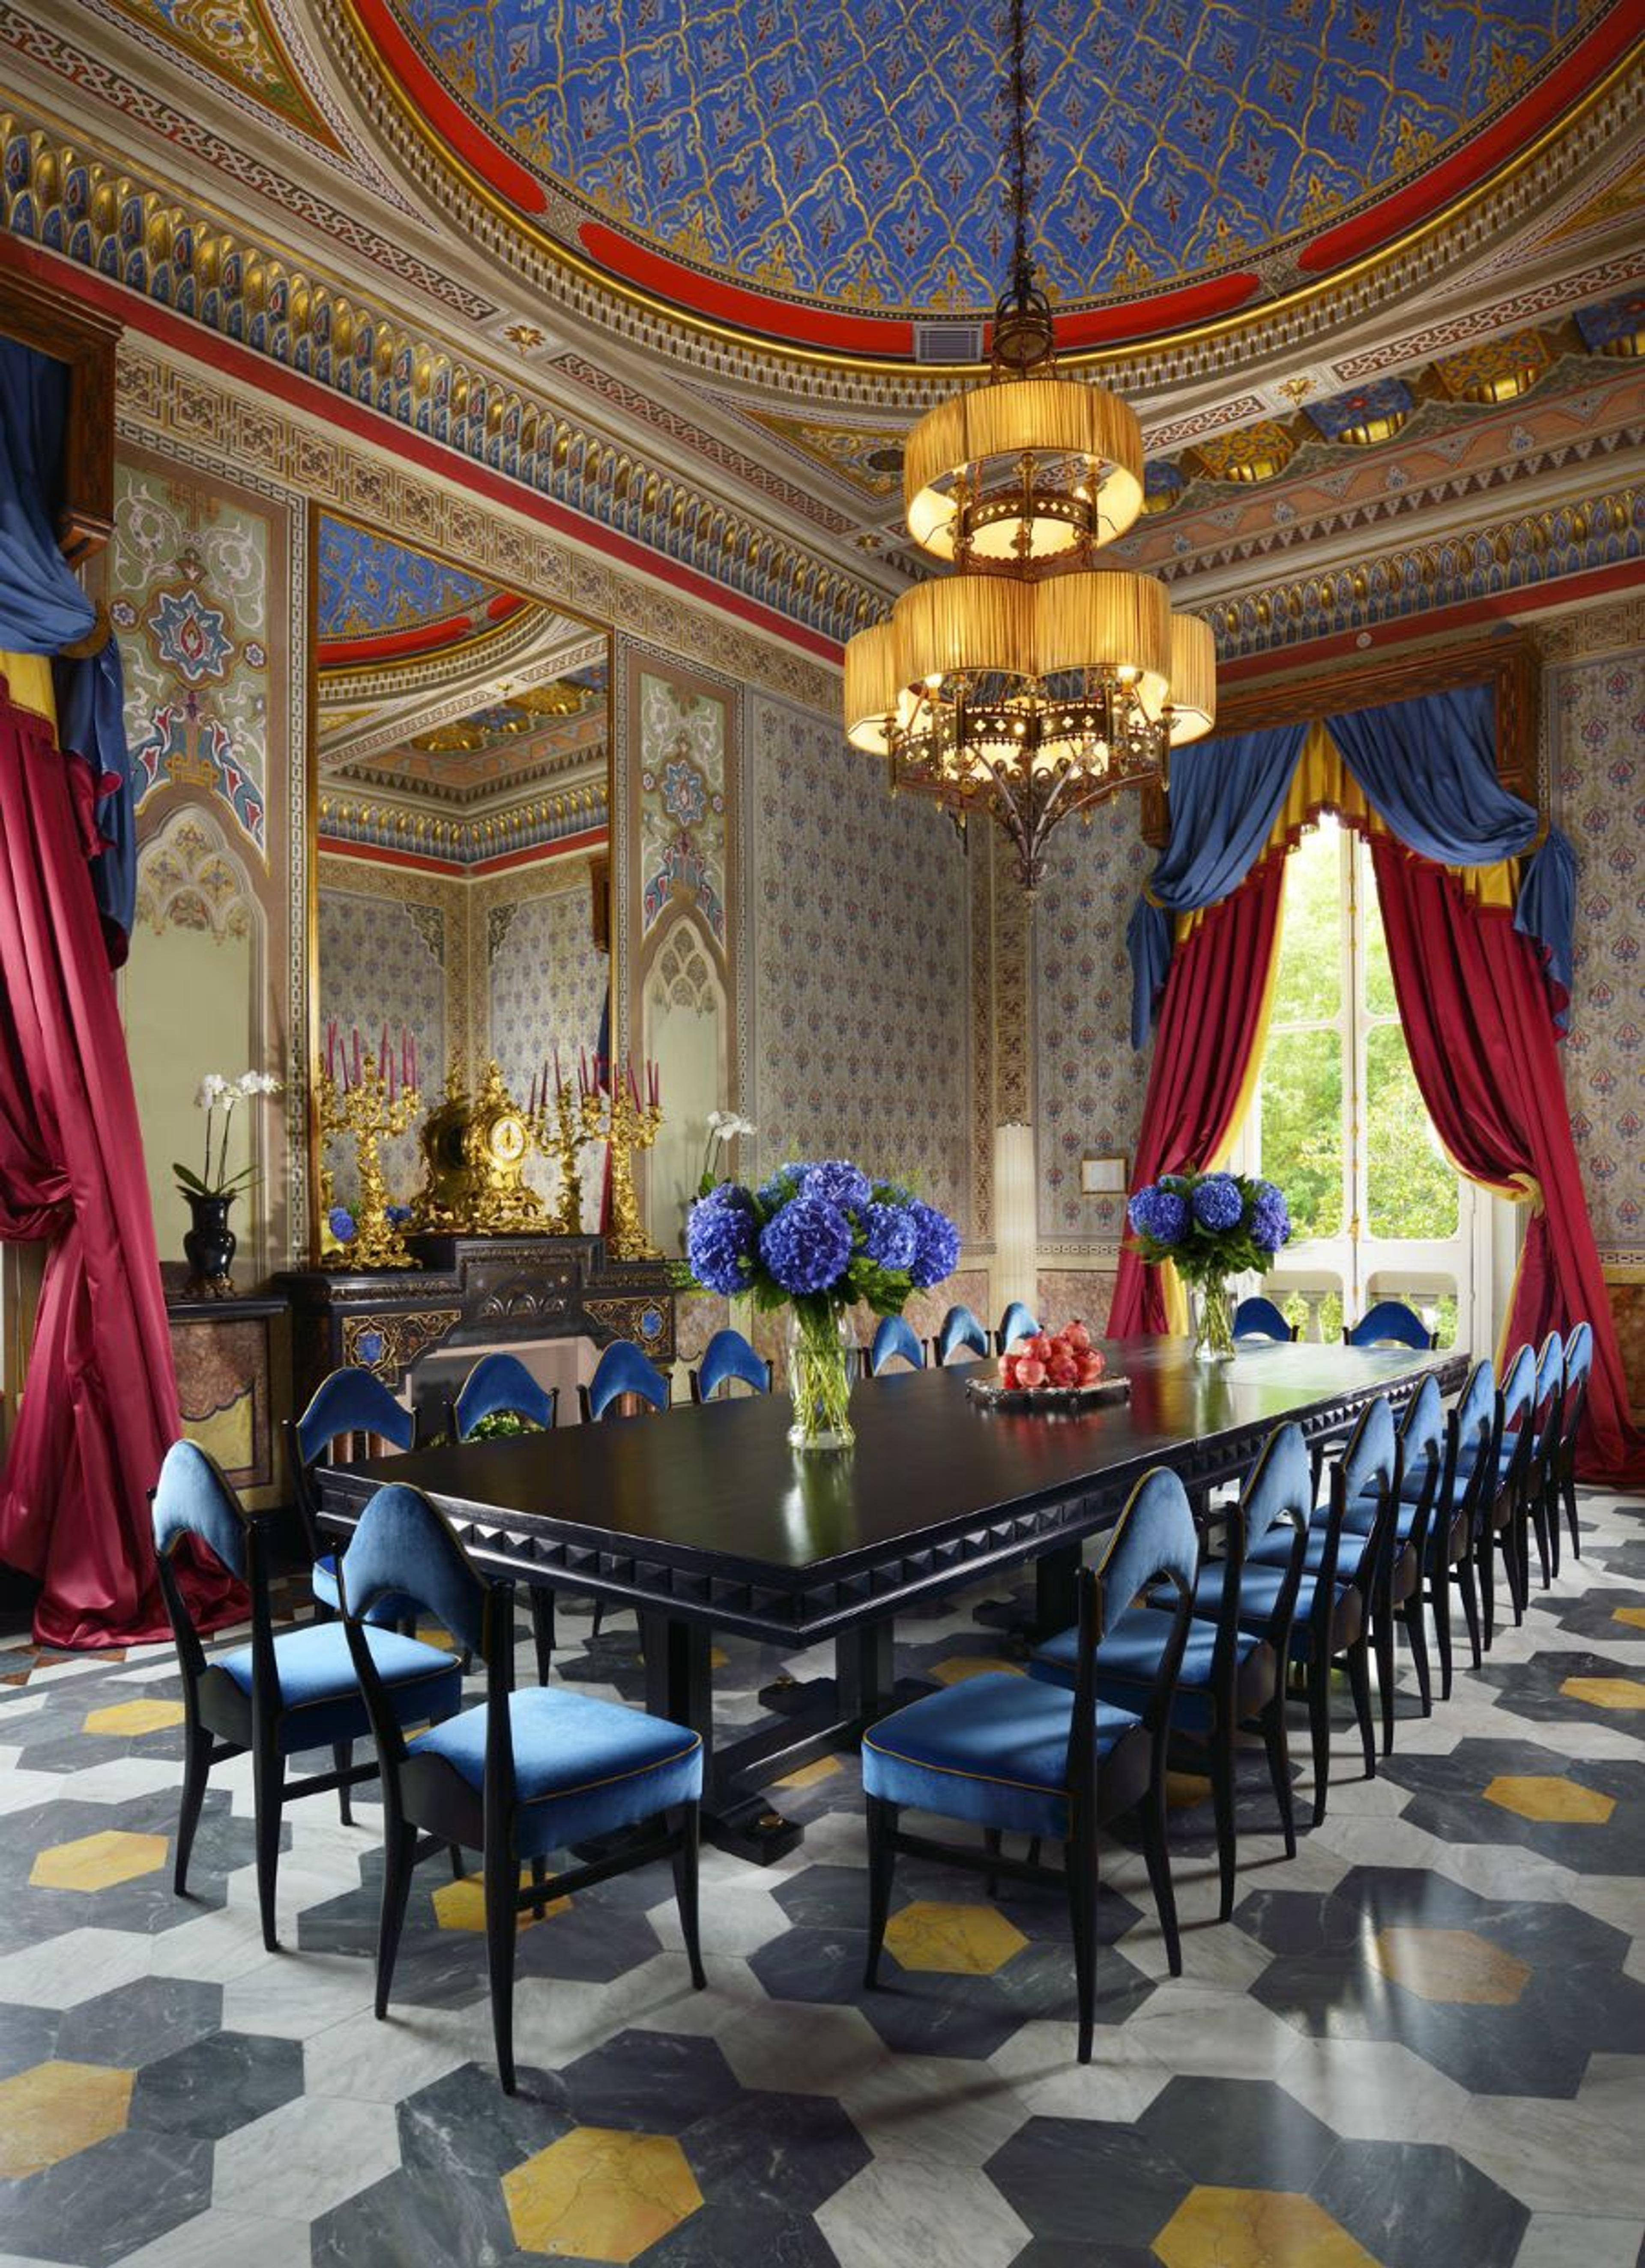 The Regal 'Sala Moresca' Hall - Hosts up to 20 seated guests and its the perfect hall for meetings and formal dinners surrounded by a precious baroque atmosphere.